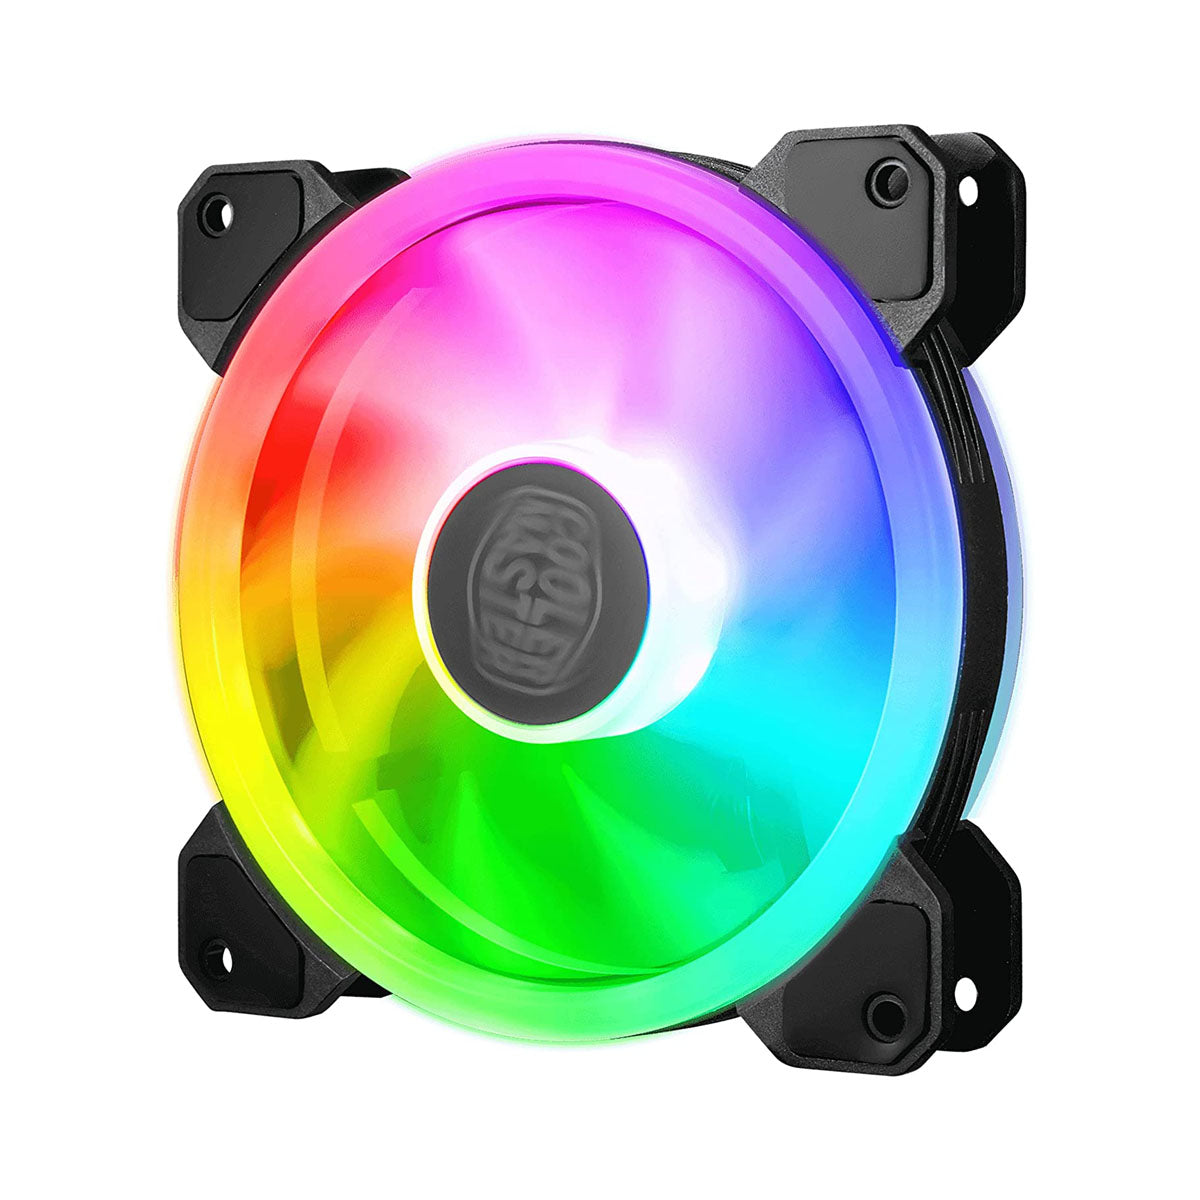 [Repacked]Cooler Master MasterFan MF120 S3 120mm Case Fan with Triple Loop ARGB Lighting and Low Noise Design